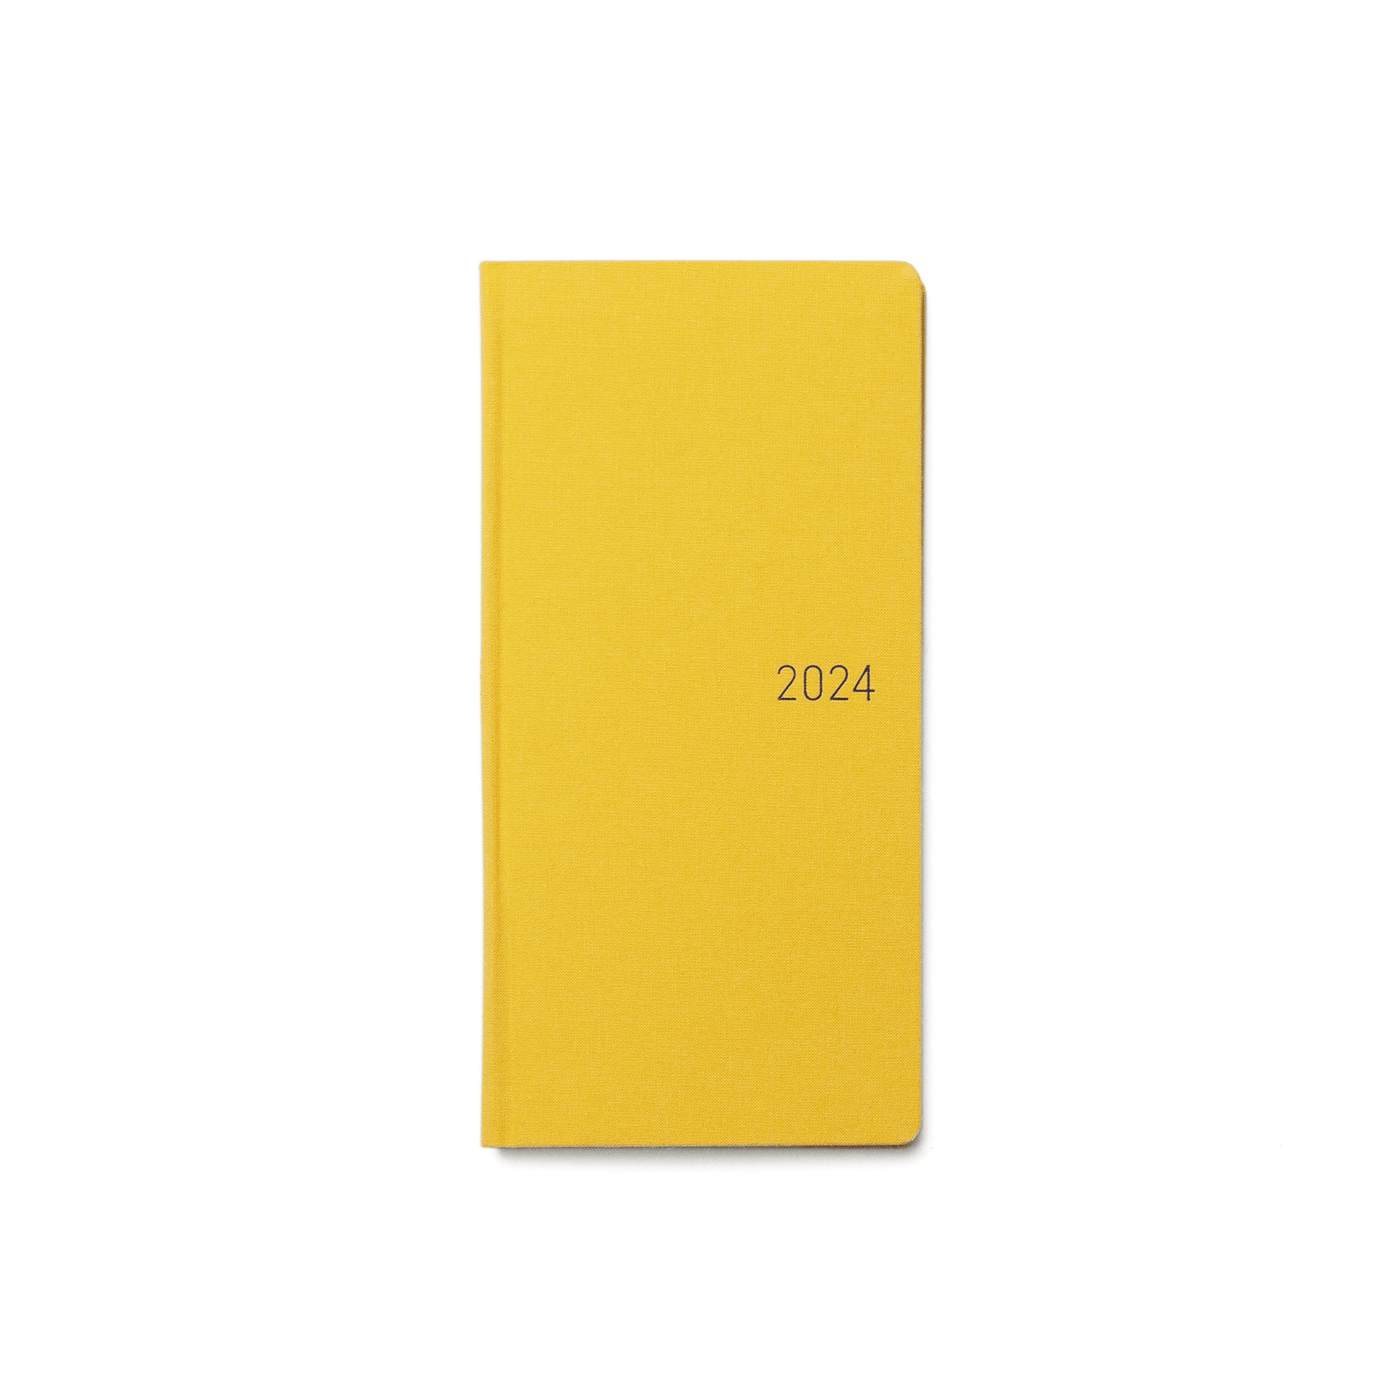 Hobonichi Roll Planner Cover (Weeks)